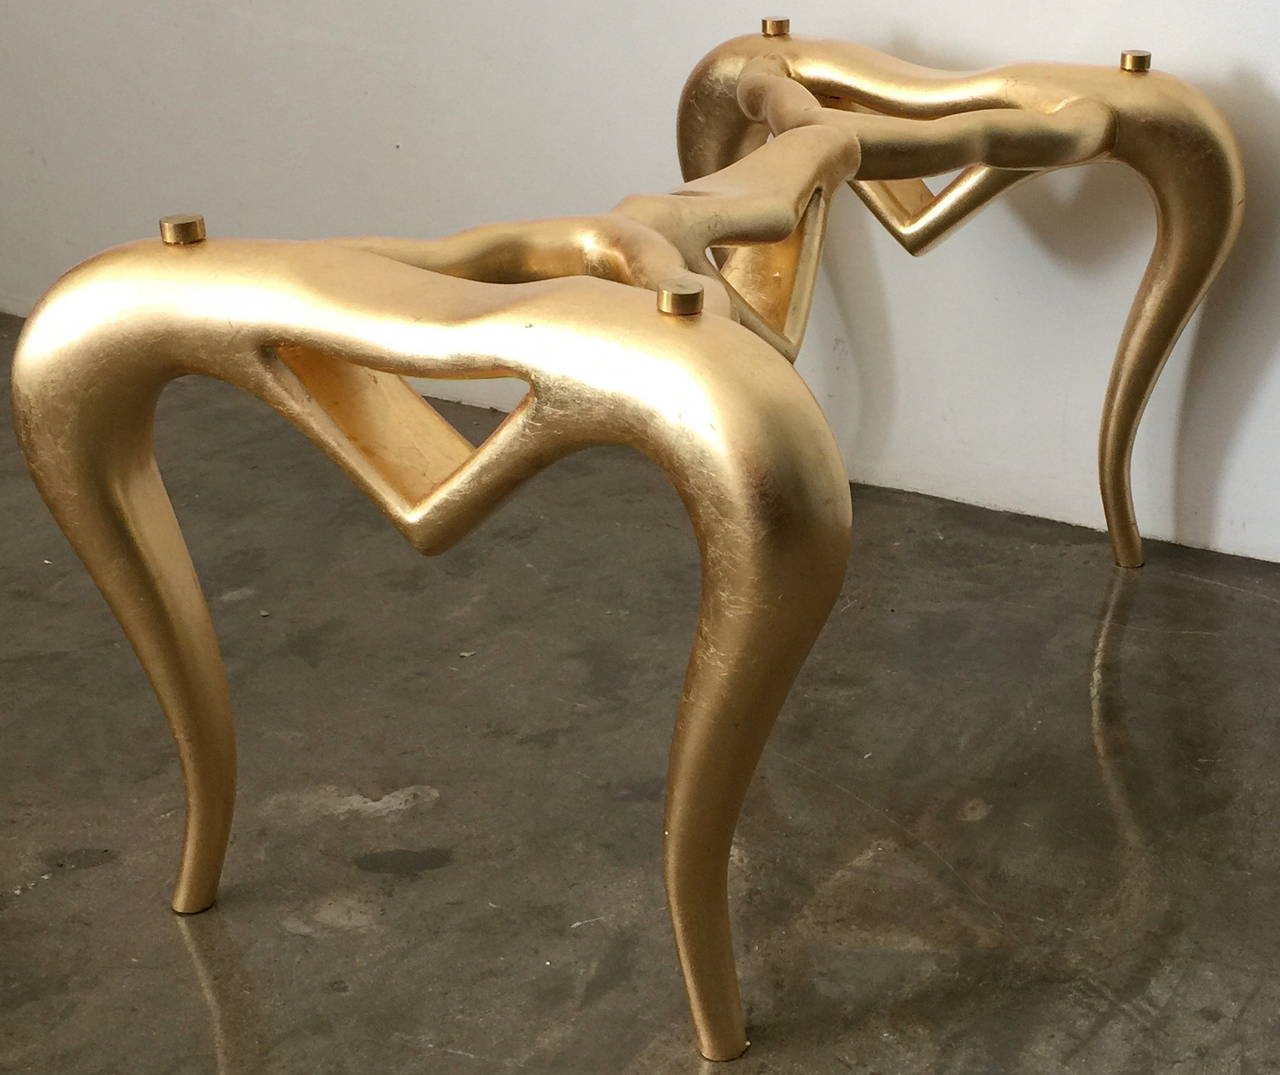 Néo-Surrealista Coffee Table by Alberto Vieyra and Jorge Quiroz In Excellent Condition For Sale In San Diego, CA